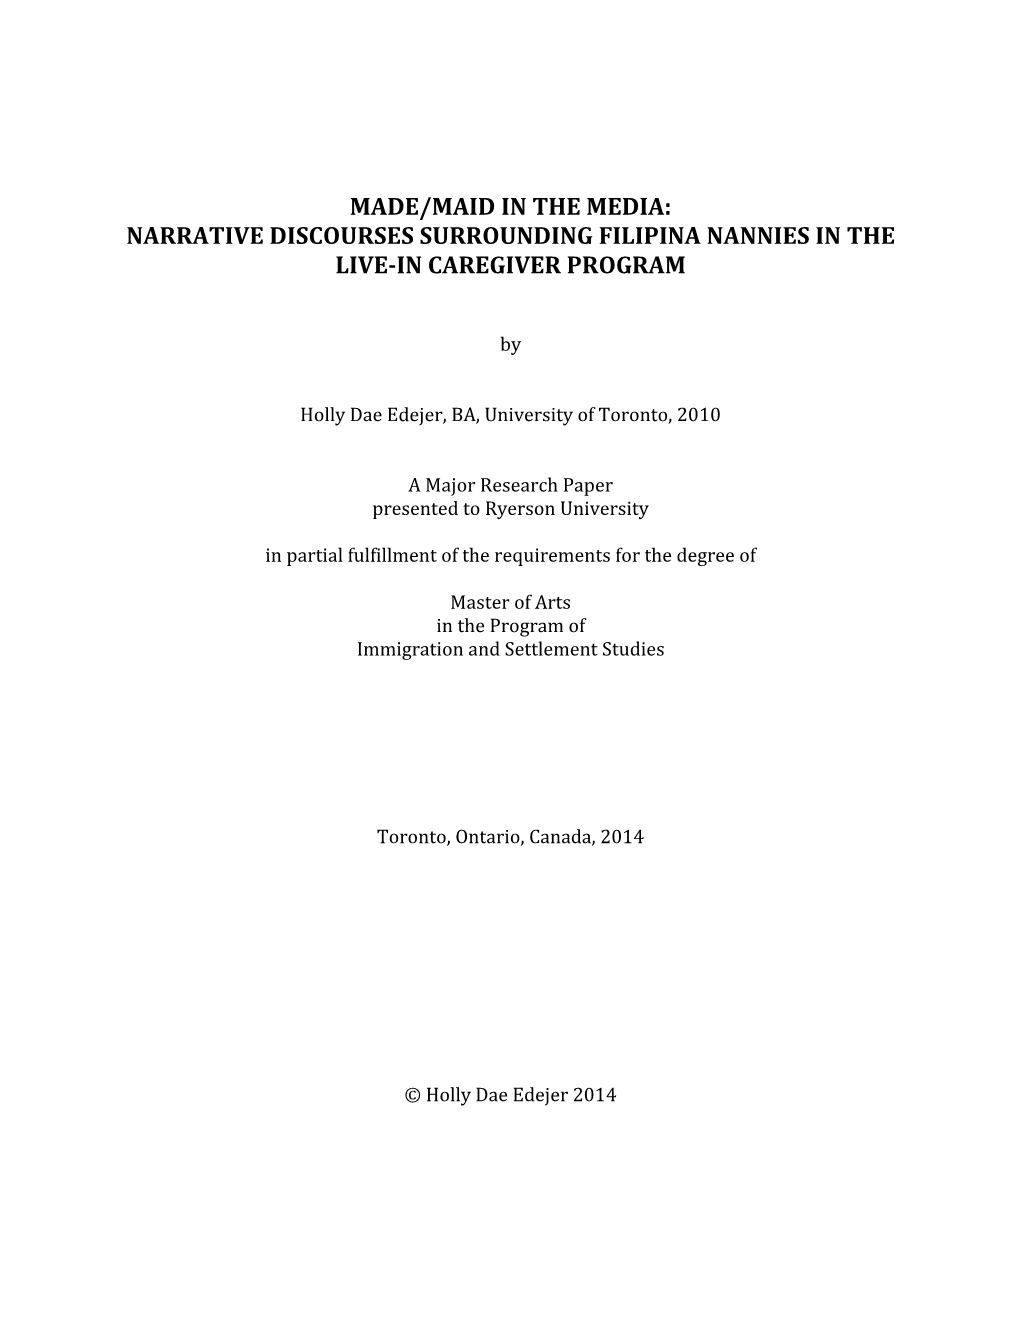 Made/Maid in the Media: Narrative Discourses Surrounding Filipina Nannies in the Live-In Caregiver Program